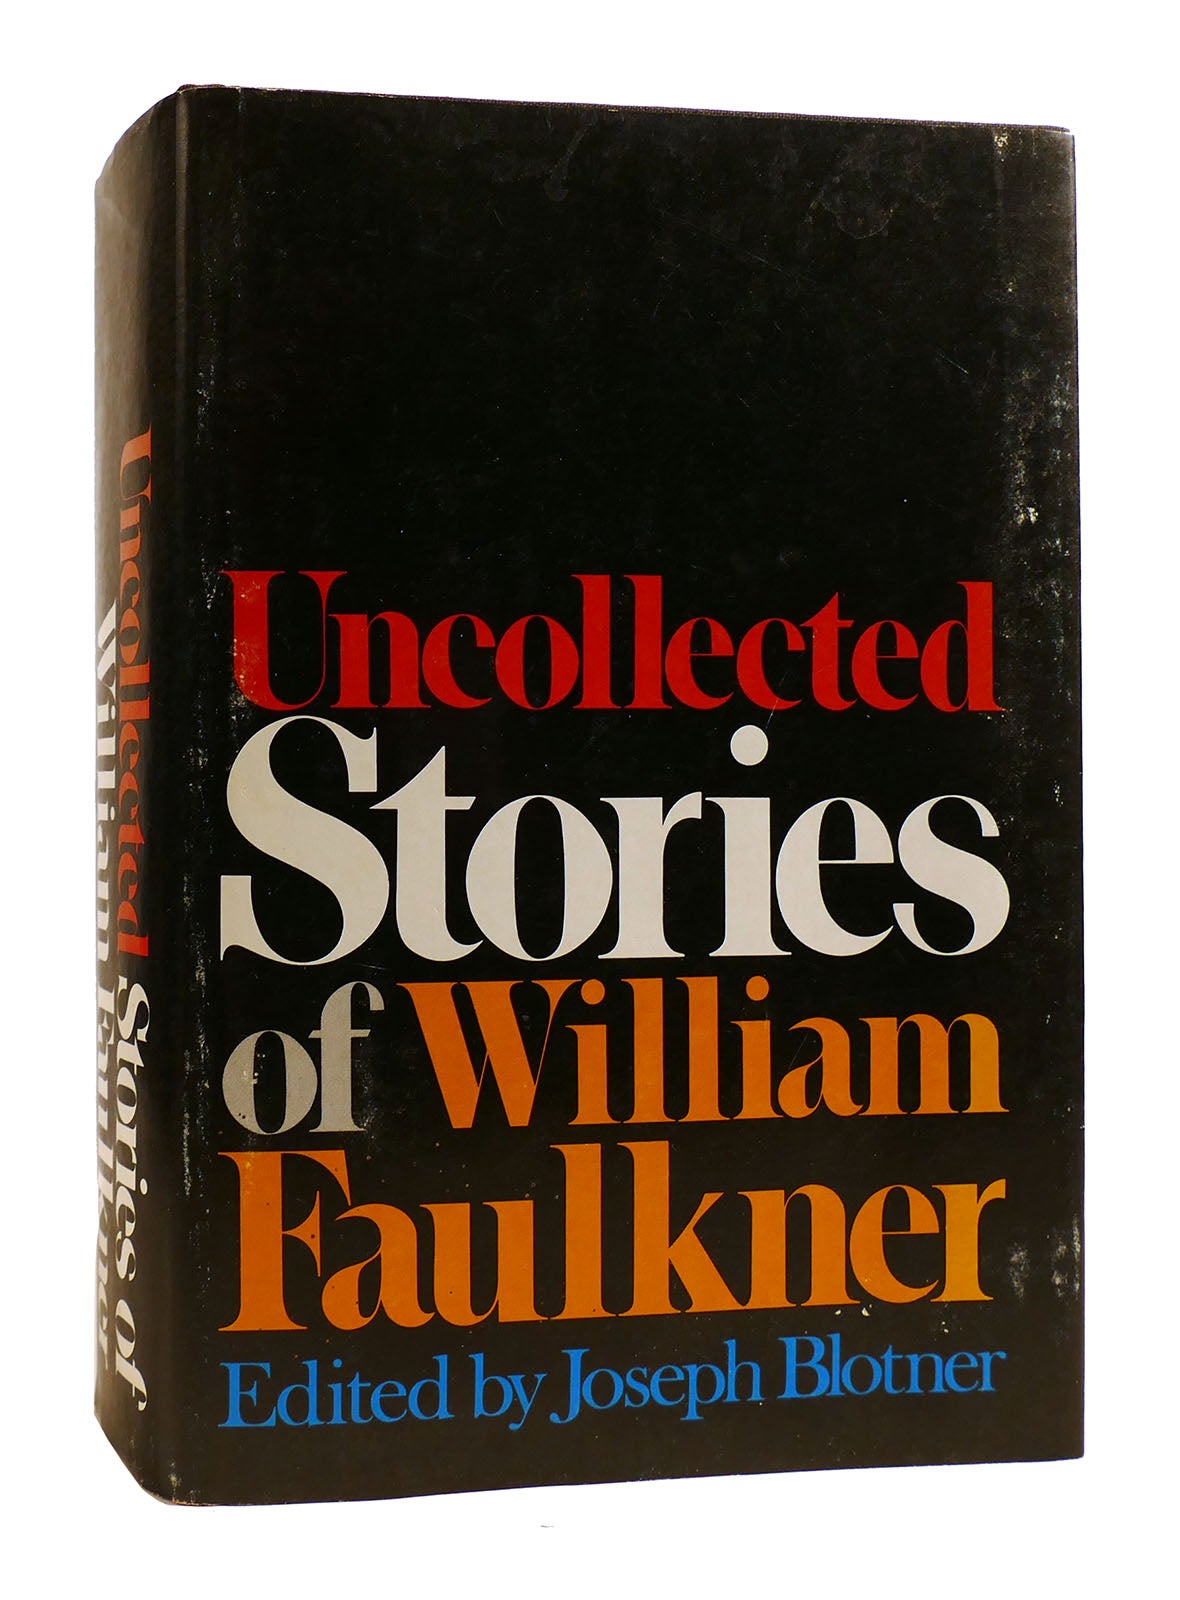 UNCOLLECTED STORIES OF WILLIAM FAULKNER by William Faulkner on Rare Book  Cellar